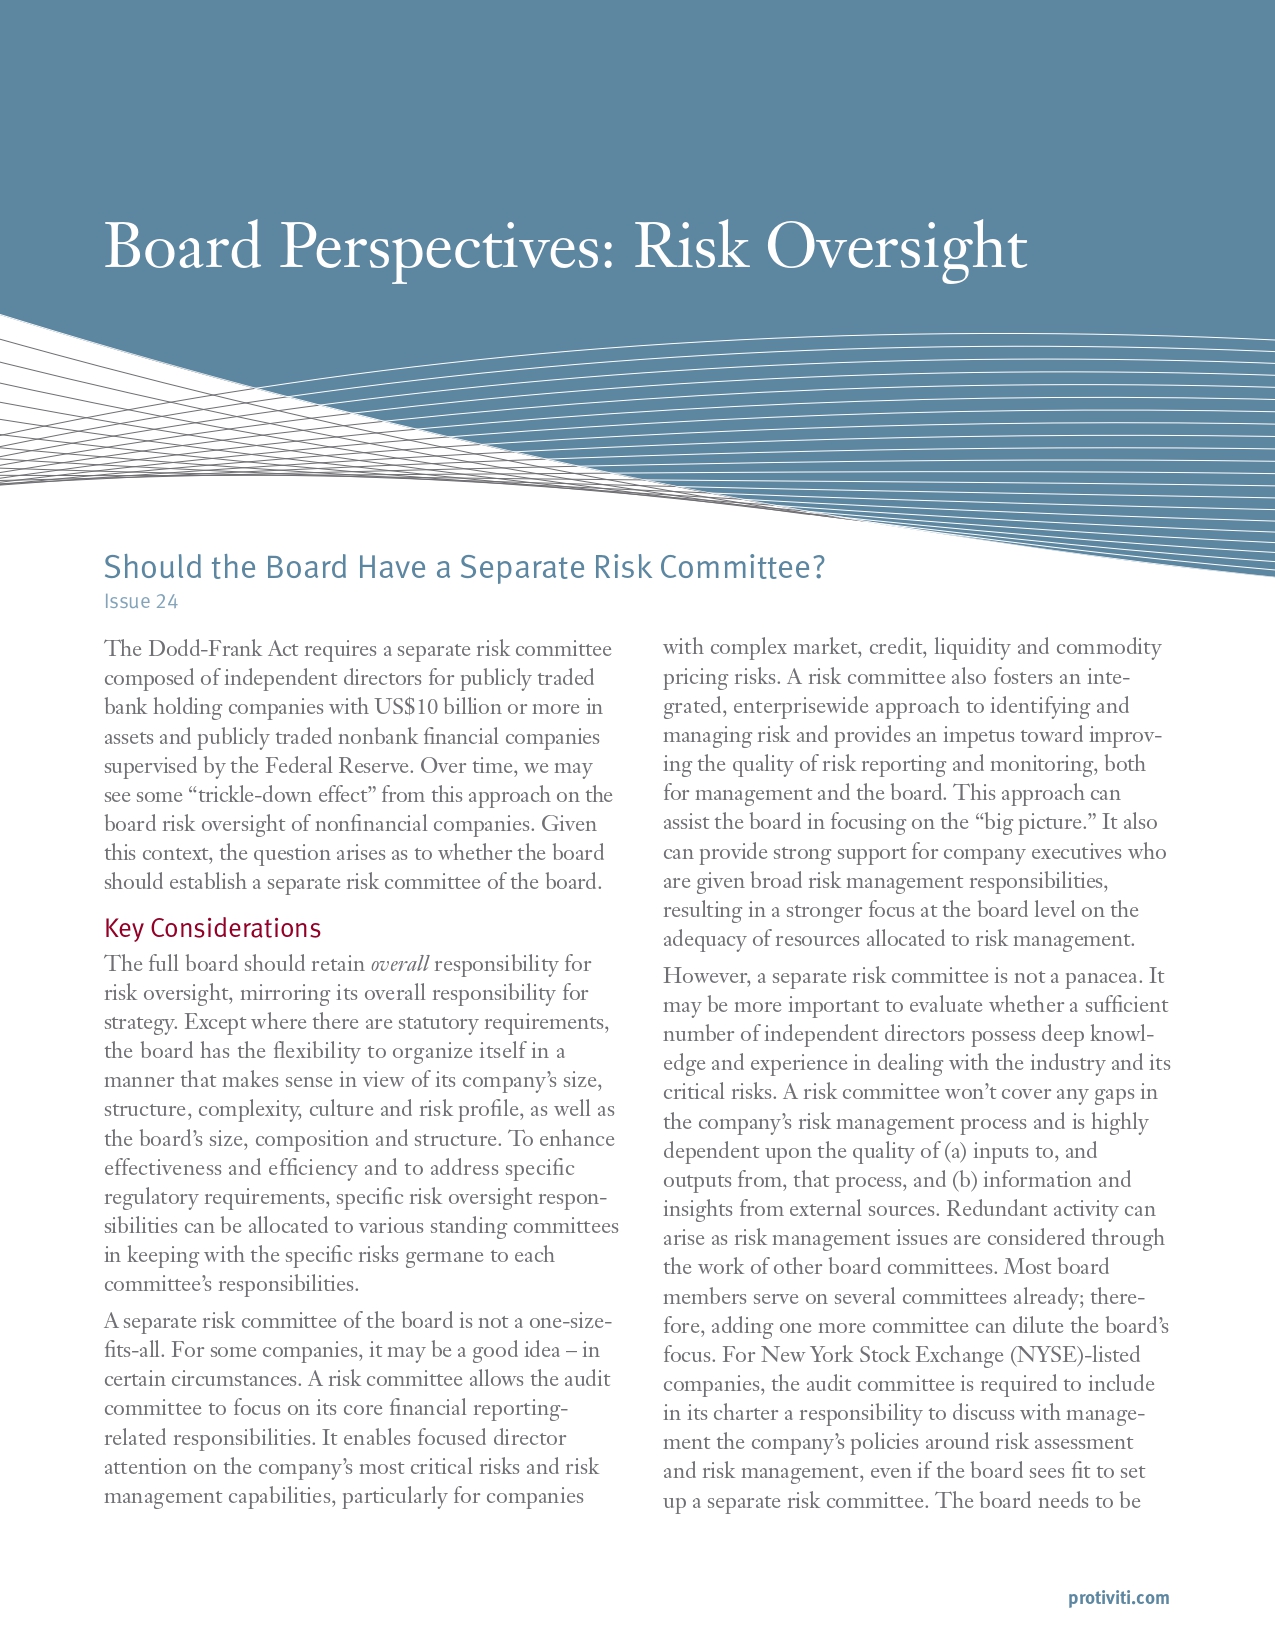 Screenshot of the first page of Should the Board Have a Separate Risk Committee - Board Perspectives - Risk Oversight, Issue 24